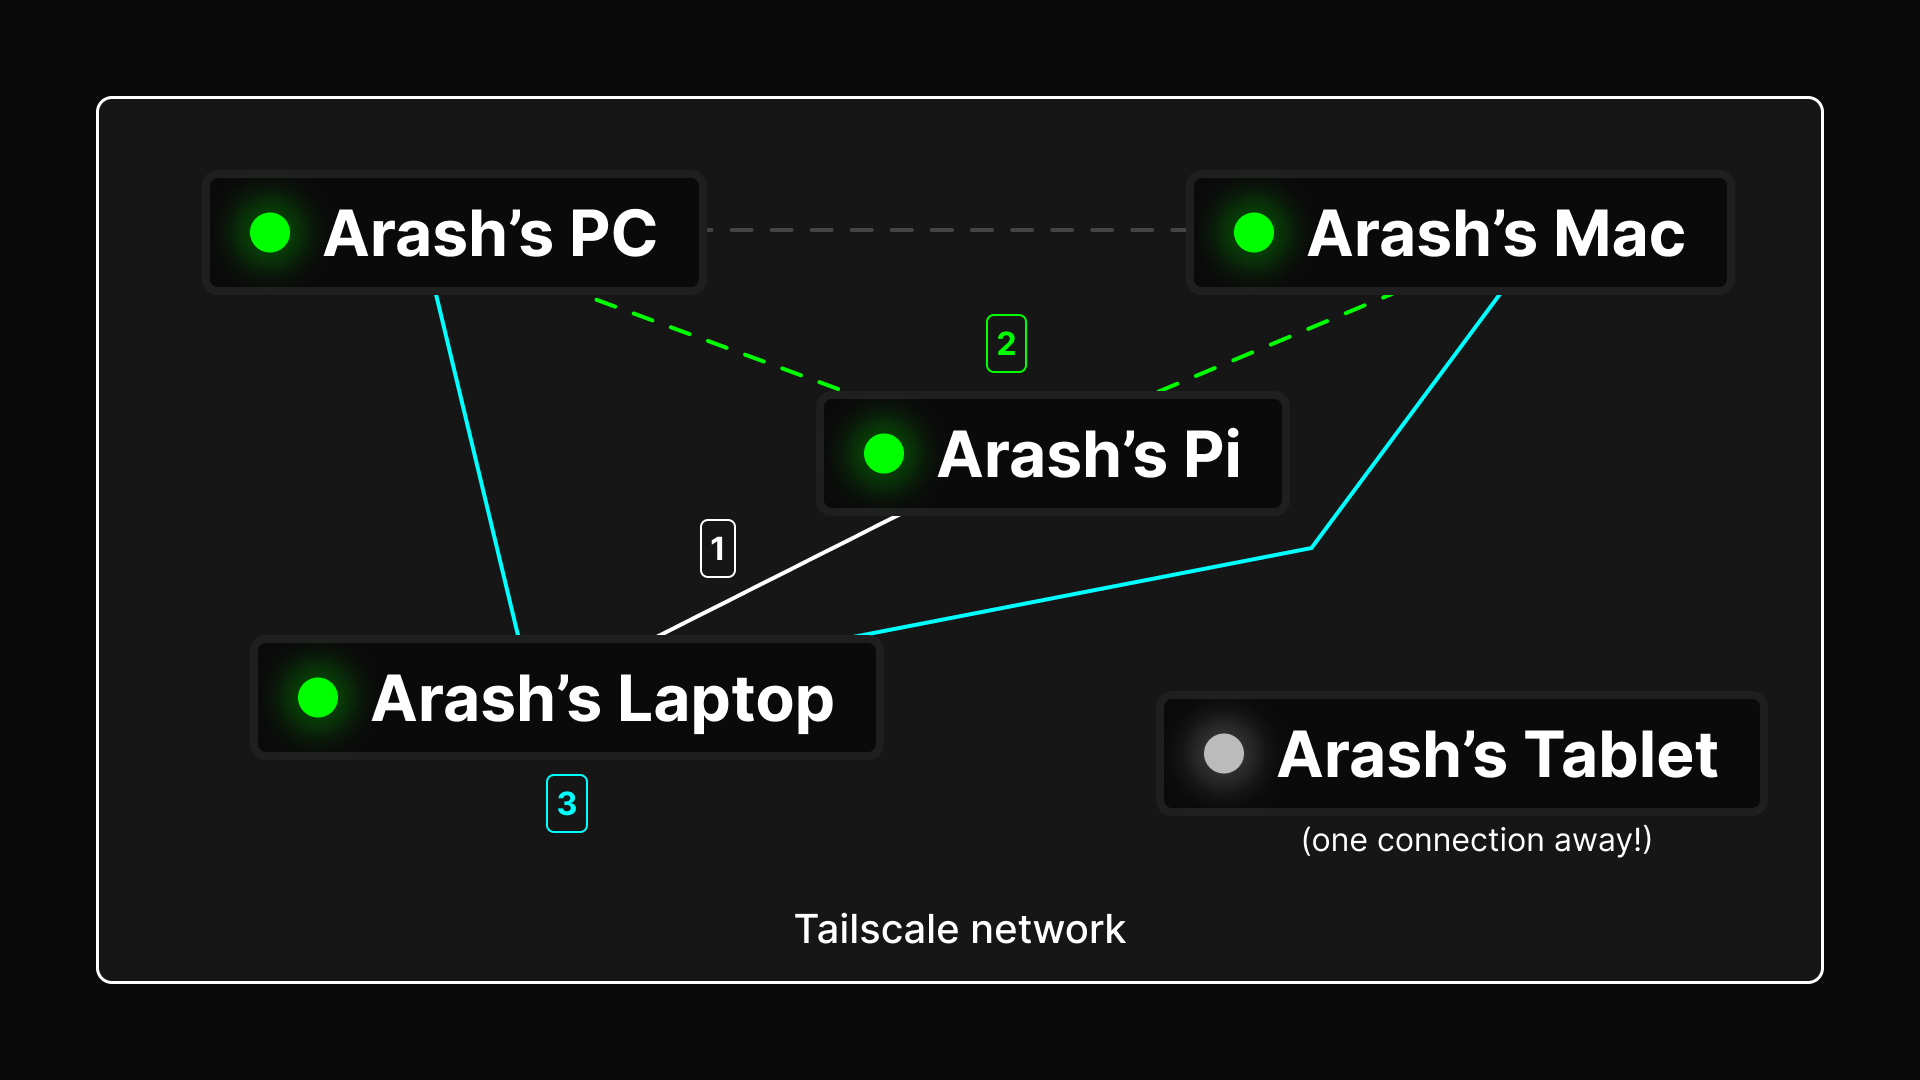 A graph-like network depicting with a line tracing from Arash's Laptop to Arash's Pi, then Arash's Pi to Arash's PC and Arash's Mac, and lastly Arash's Laptop to Arash's PC and Arash's Mac.